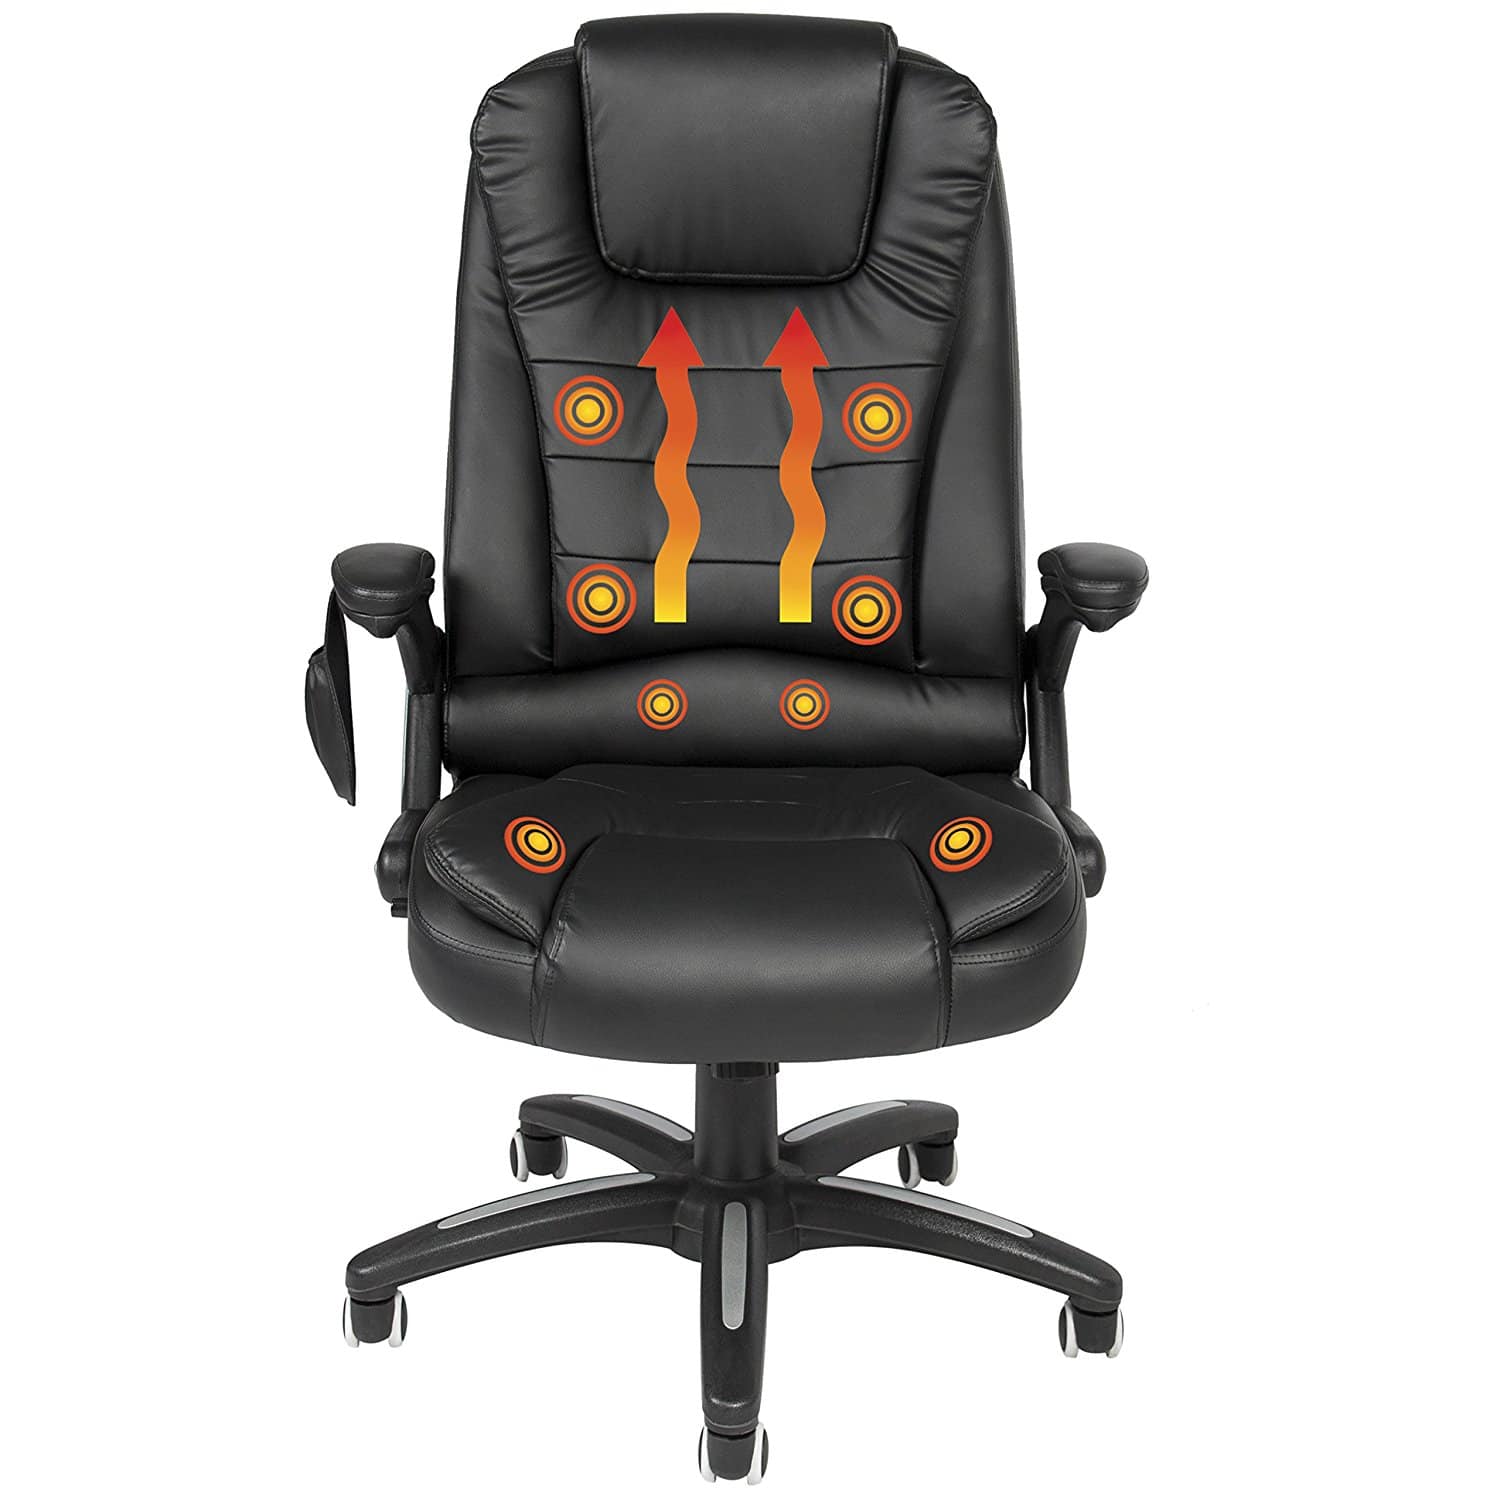 Top 3 Heated Office Chairs (And a Bonus!) Reviews 2020